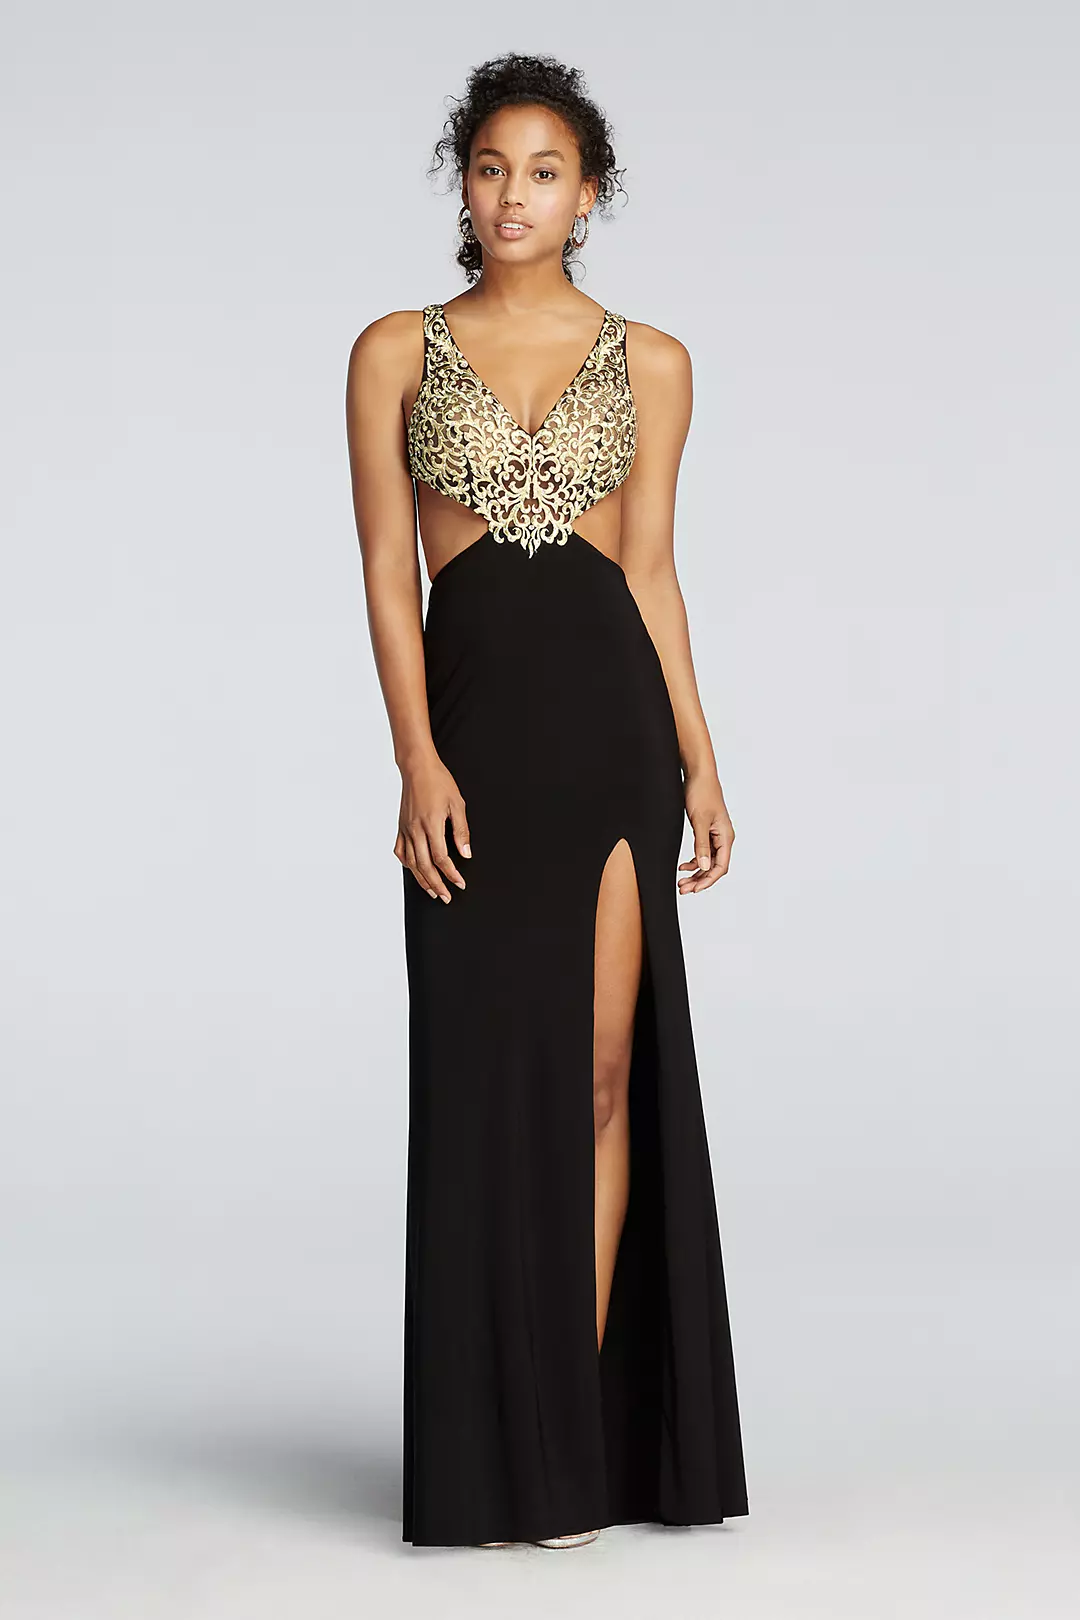 Beaded Cut Out Prom Dress with Side Slit Skirt Image